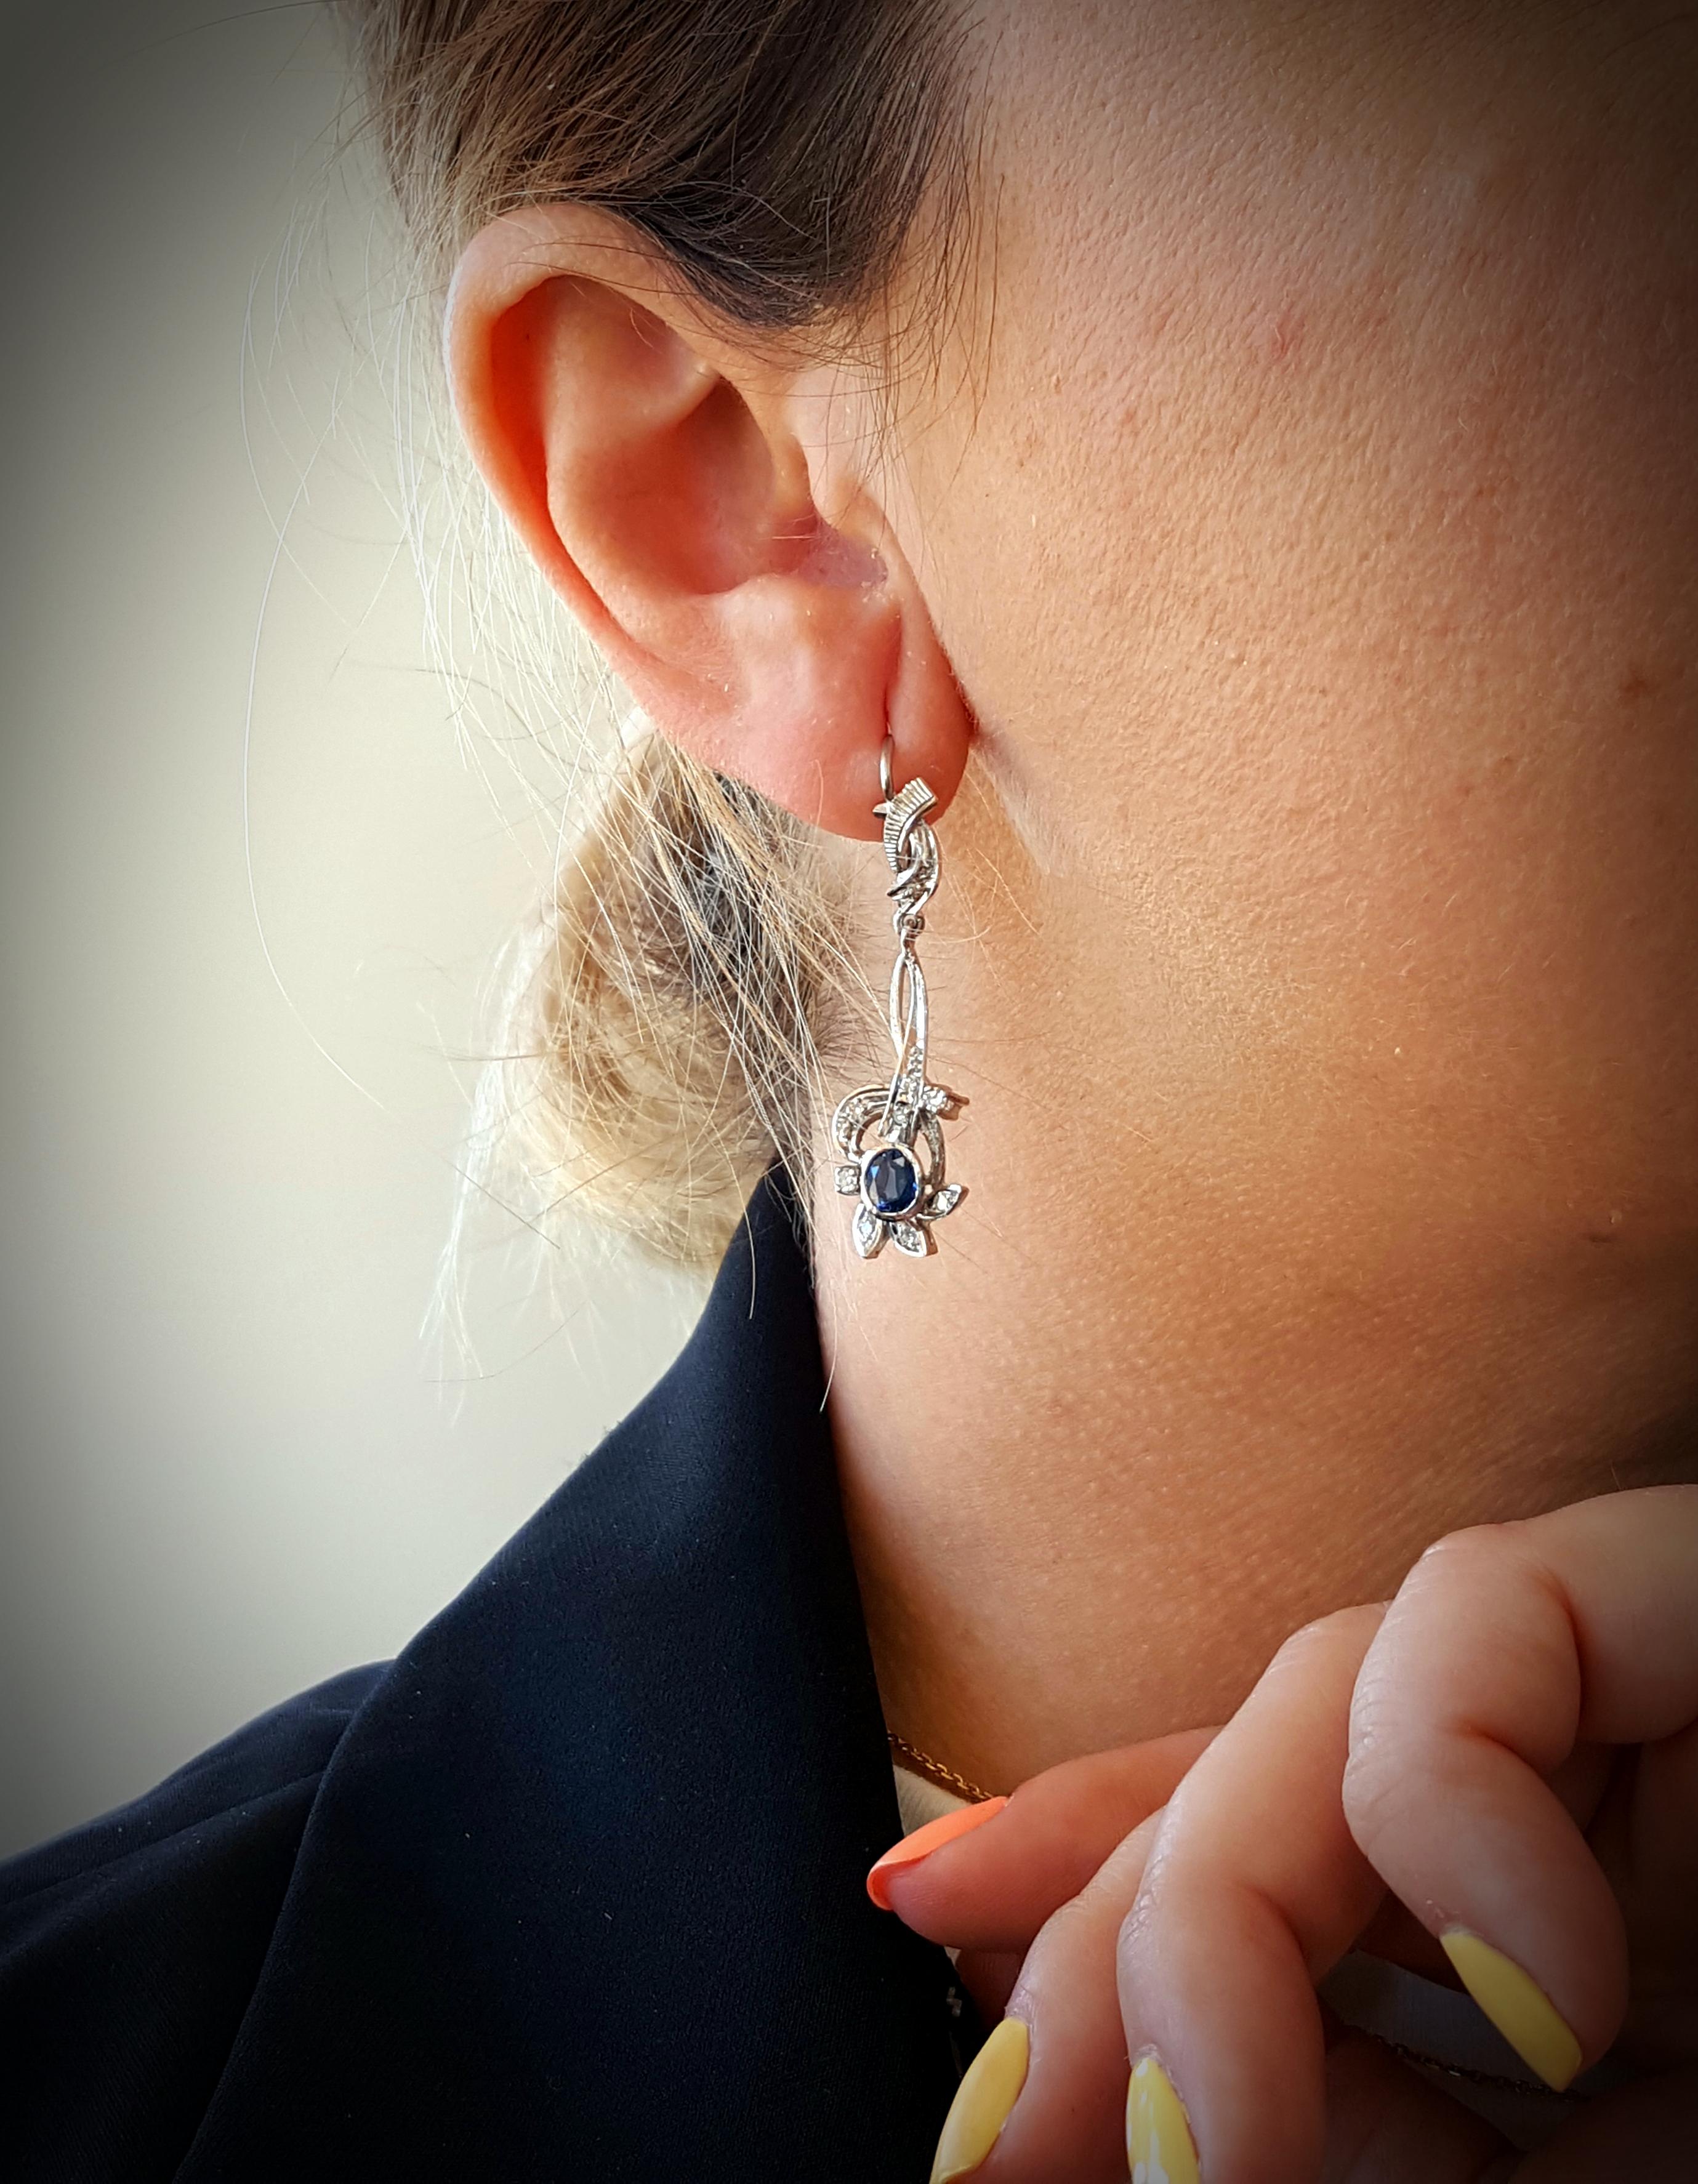 Estate 14 Karat White Gold Blue Sapphire and Diamond Leverback Earrings.  The earrings feature a pair of beautifully matched oval shaped blue sapphires.  The stones are each set into a 14 karat white gold bezel enhanced by an ornate pattern of